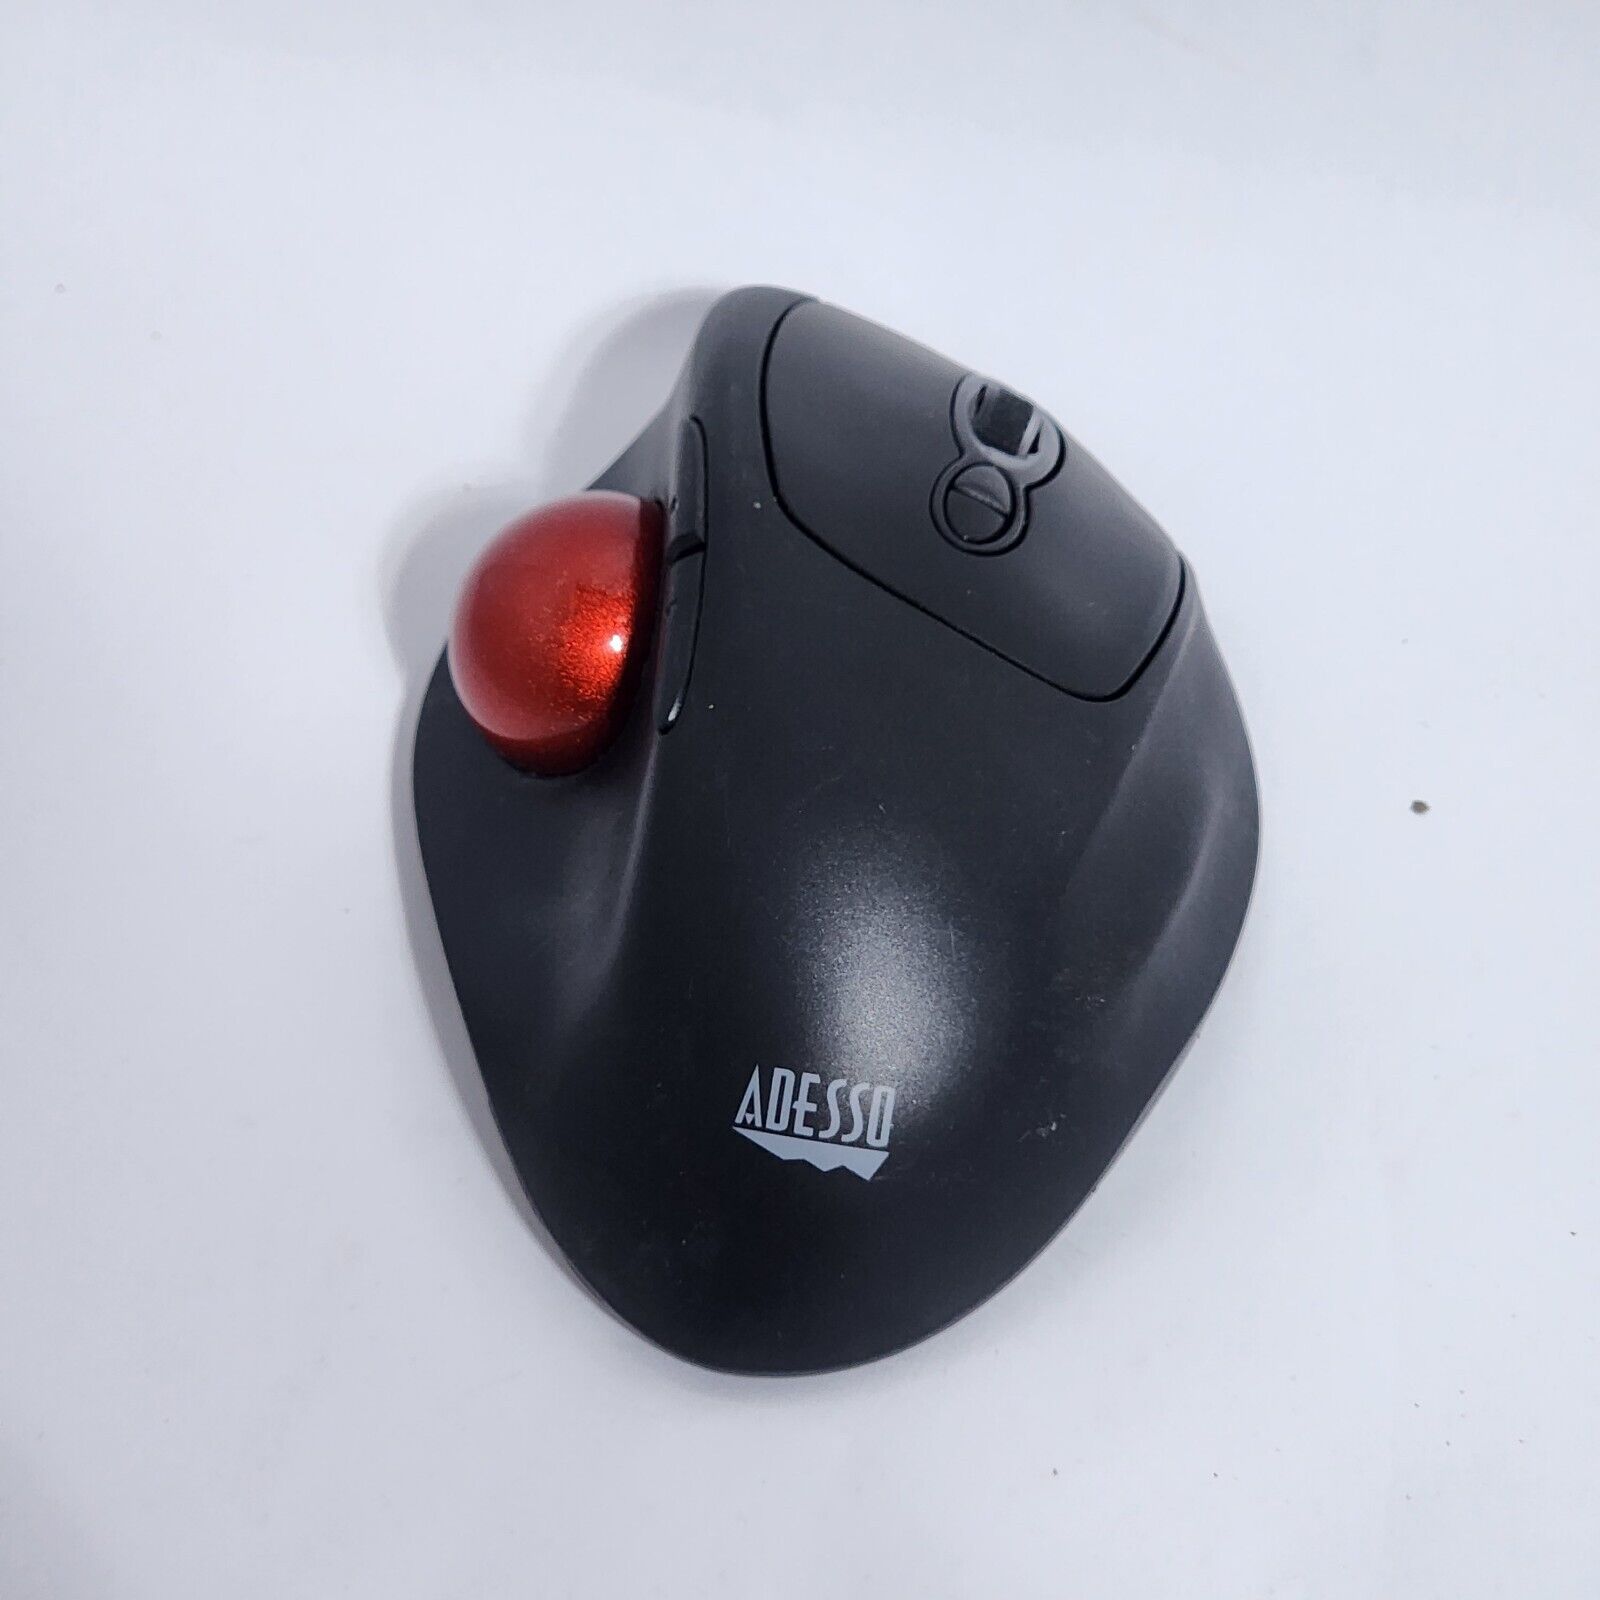 Adesso iMouse T30 - 2.4 GHz Wireless 4 Button Desktop Trackball (imouset30)